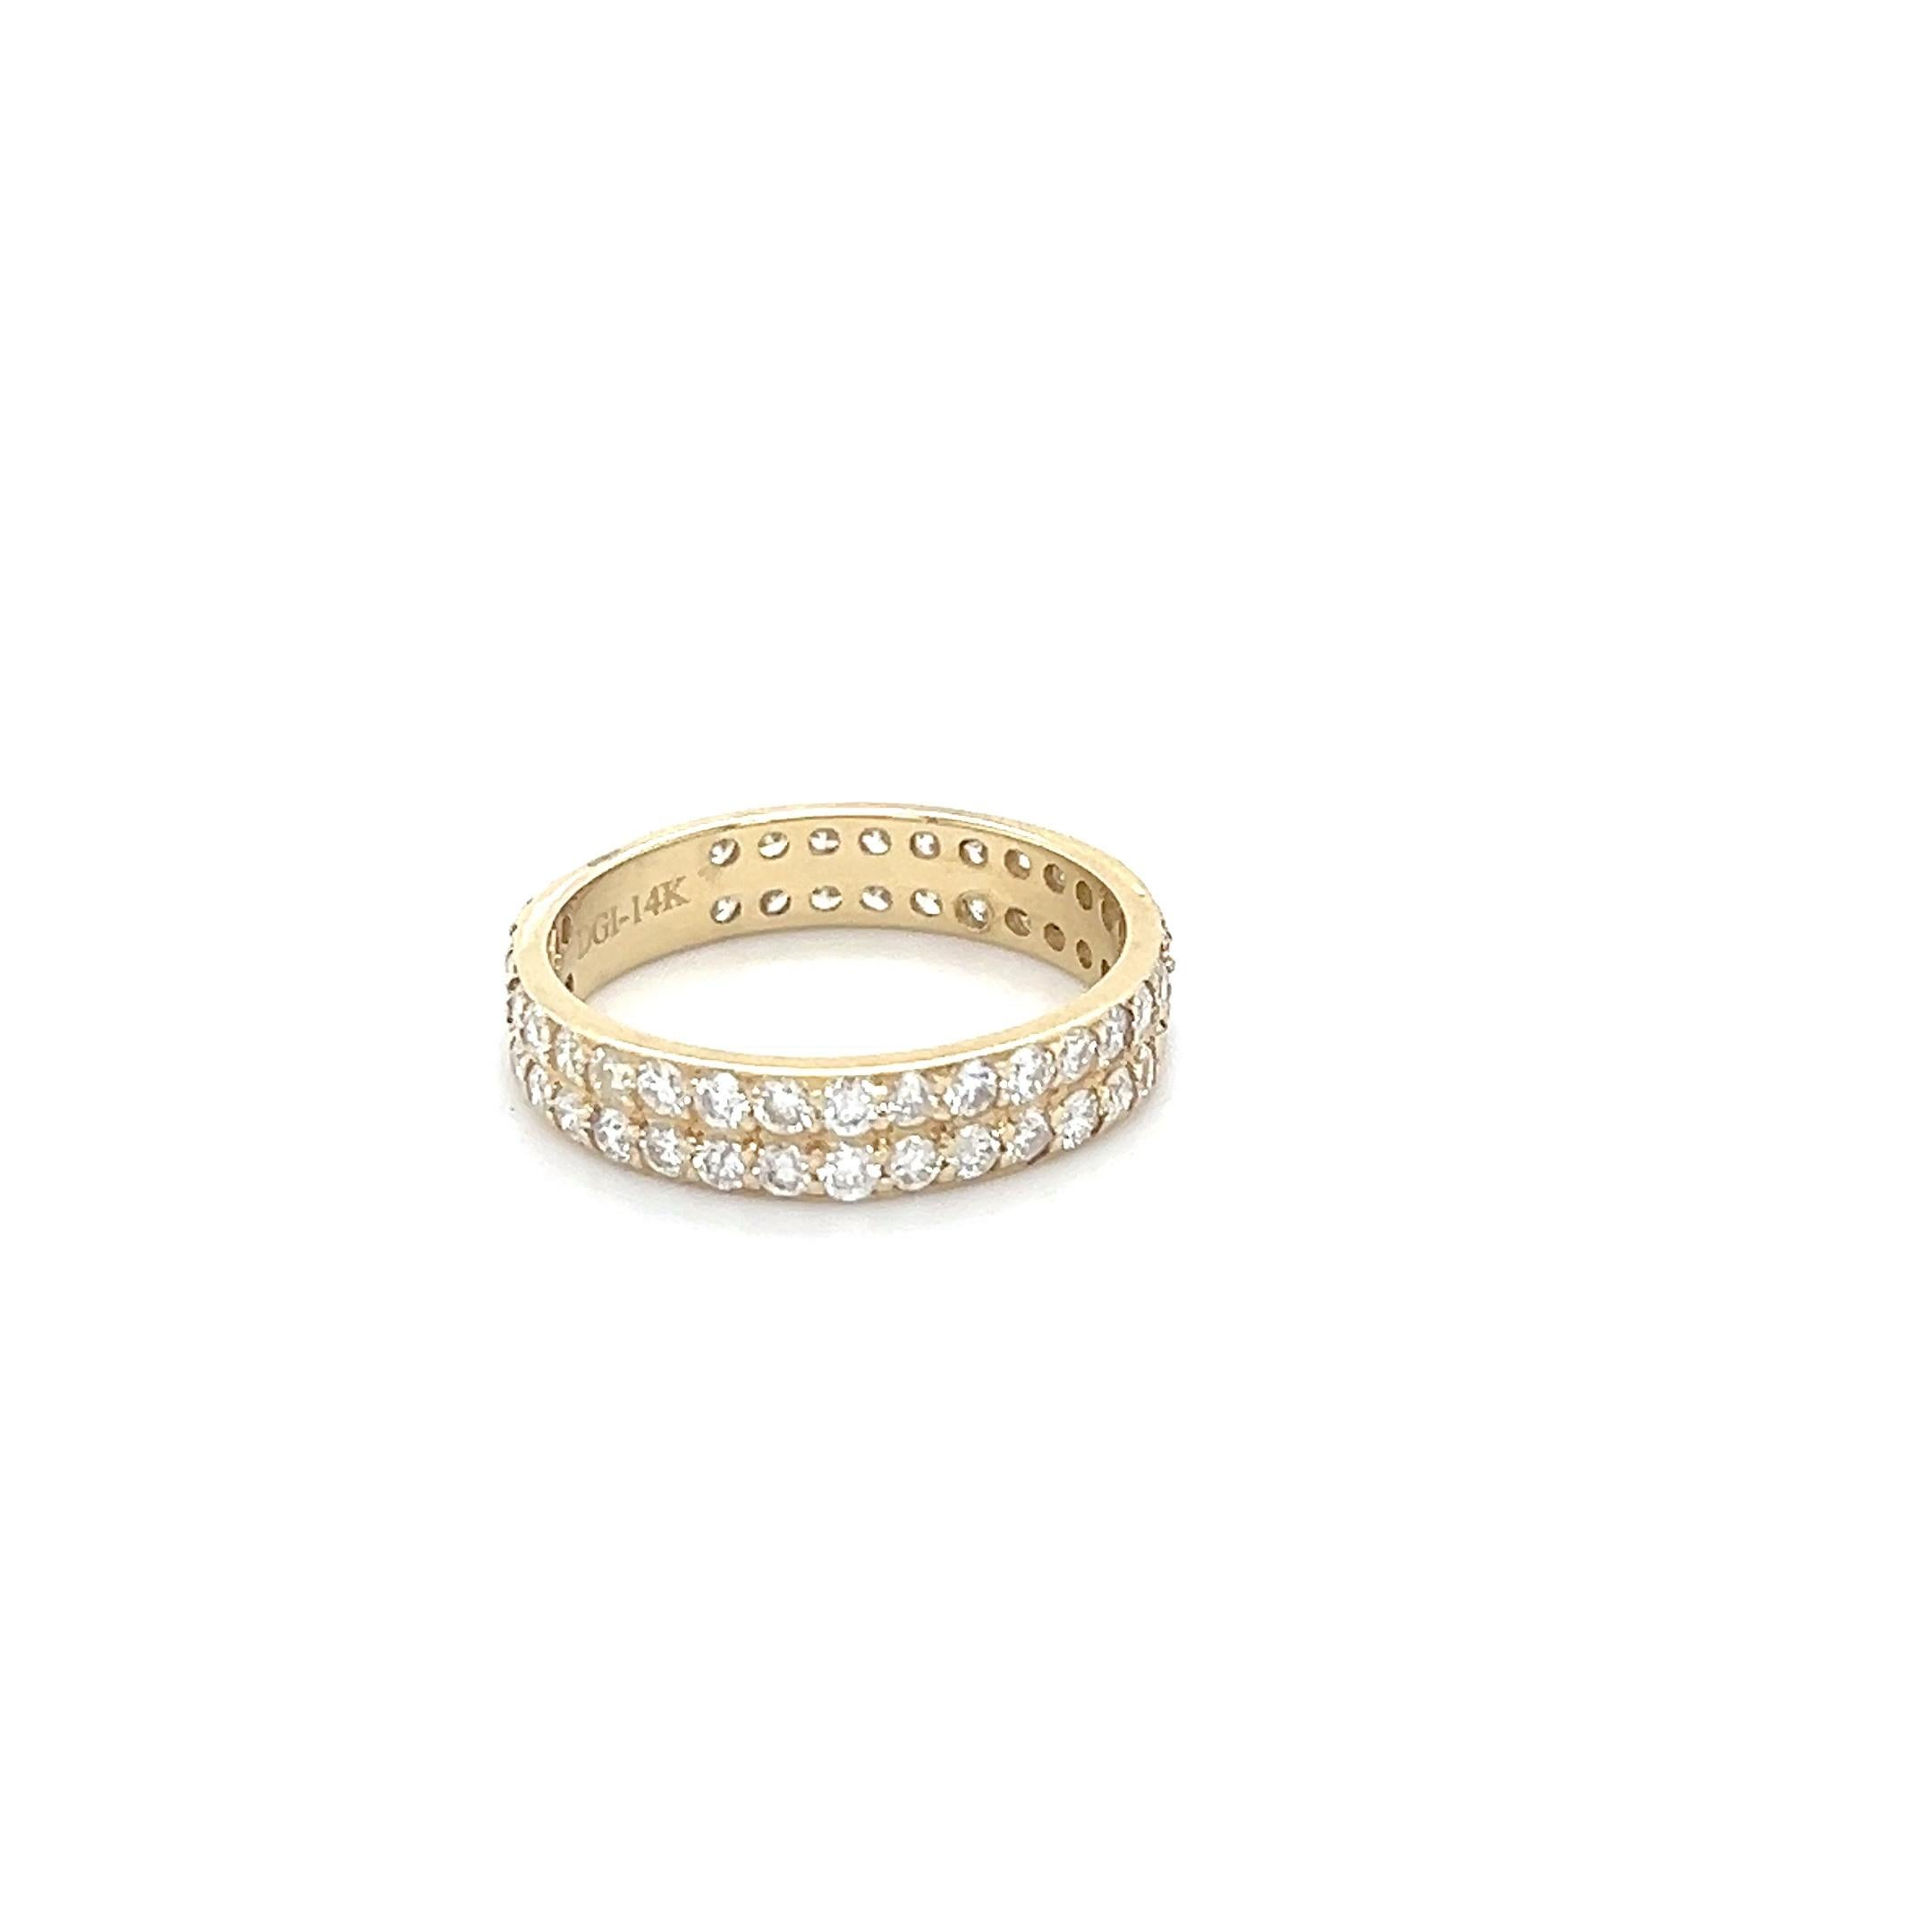 This ring has 60 Natural Round Cut Diamonds that weigh 1.48 Carats (Clarity: VS, Color: H) 
It has a gold gram weight of approximately 3.0 grams and is set in 14 Karat Yello Gold.

Ring size is 7 and can be re-sized, free of charge.